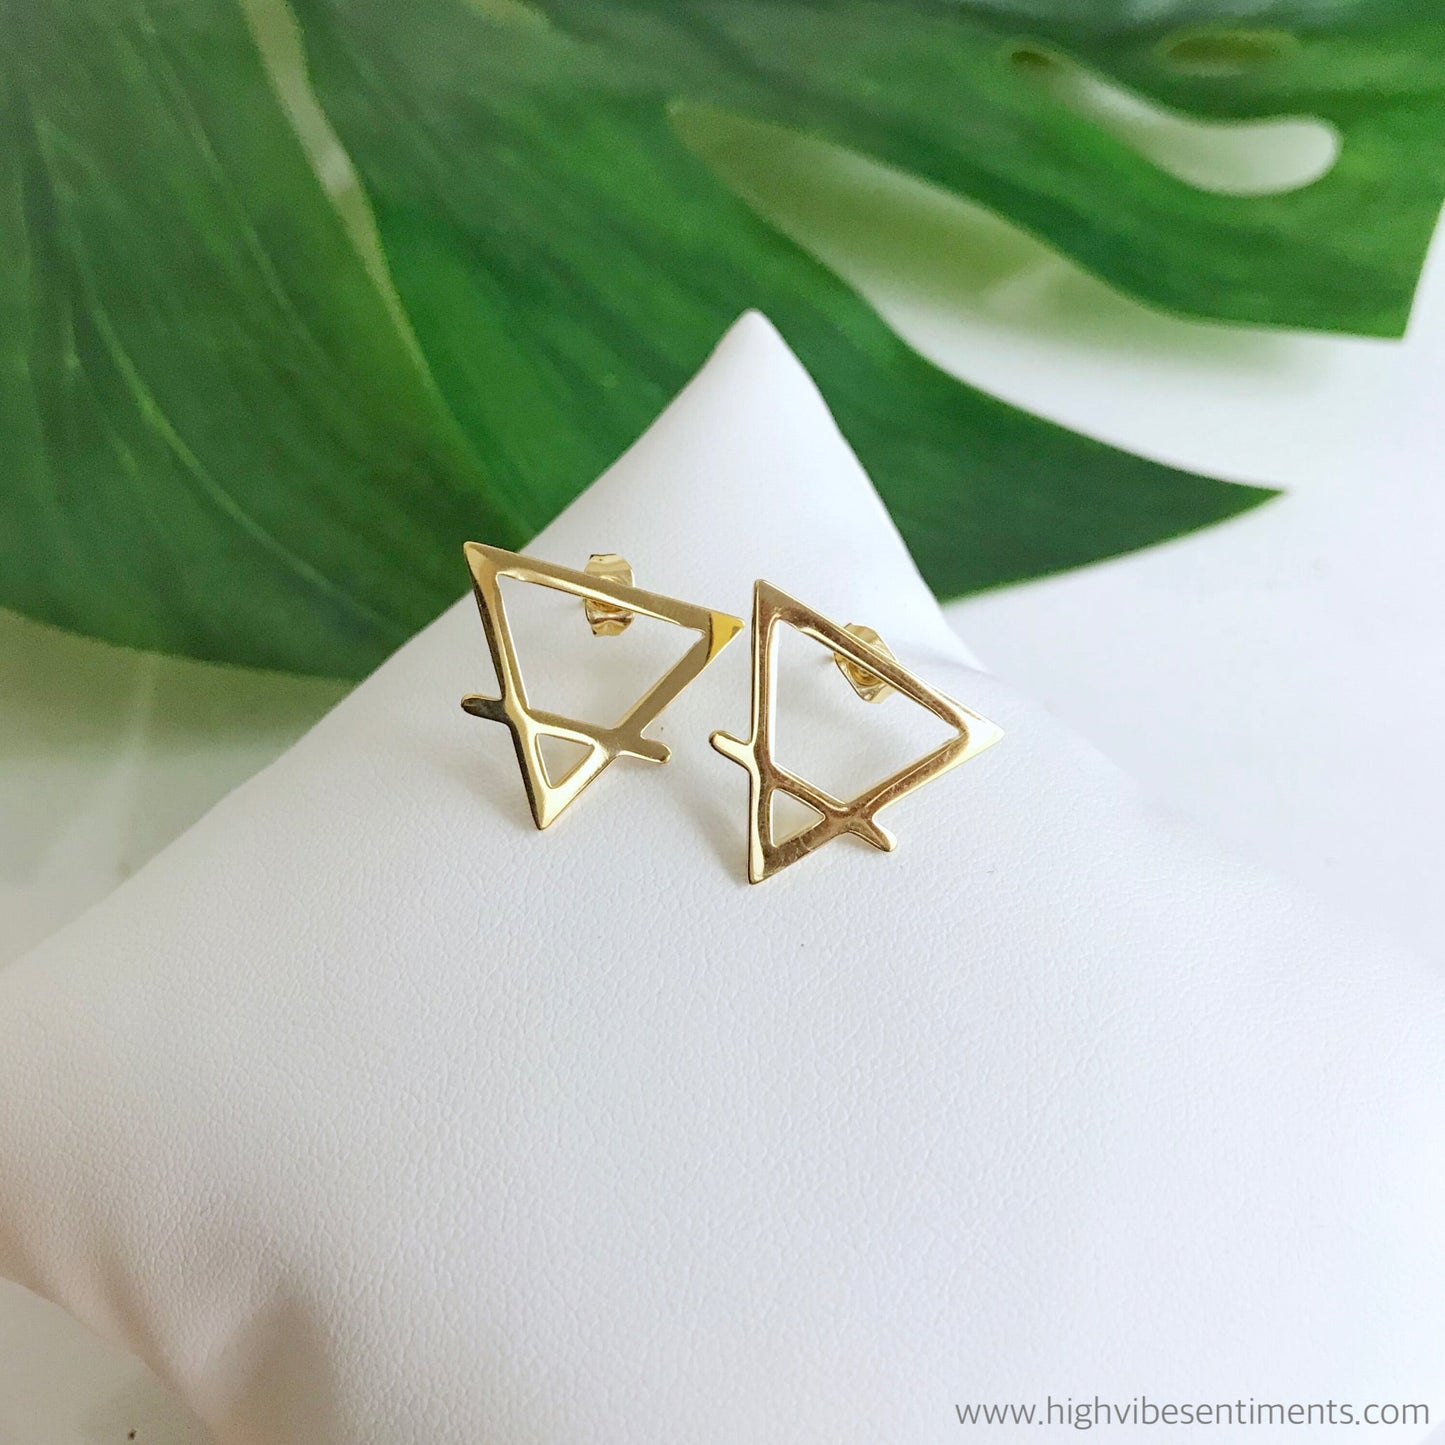 High Vibe Sentiments, Alchemy & The Elements Studs